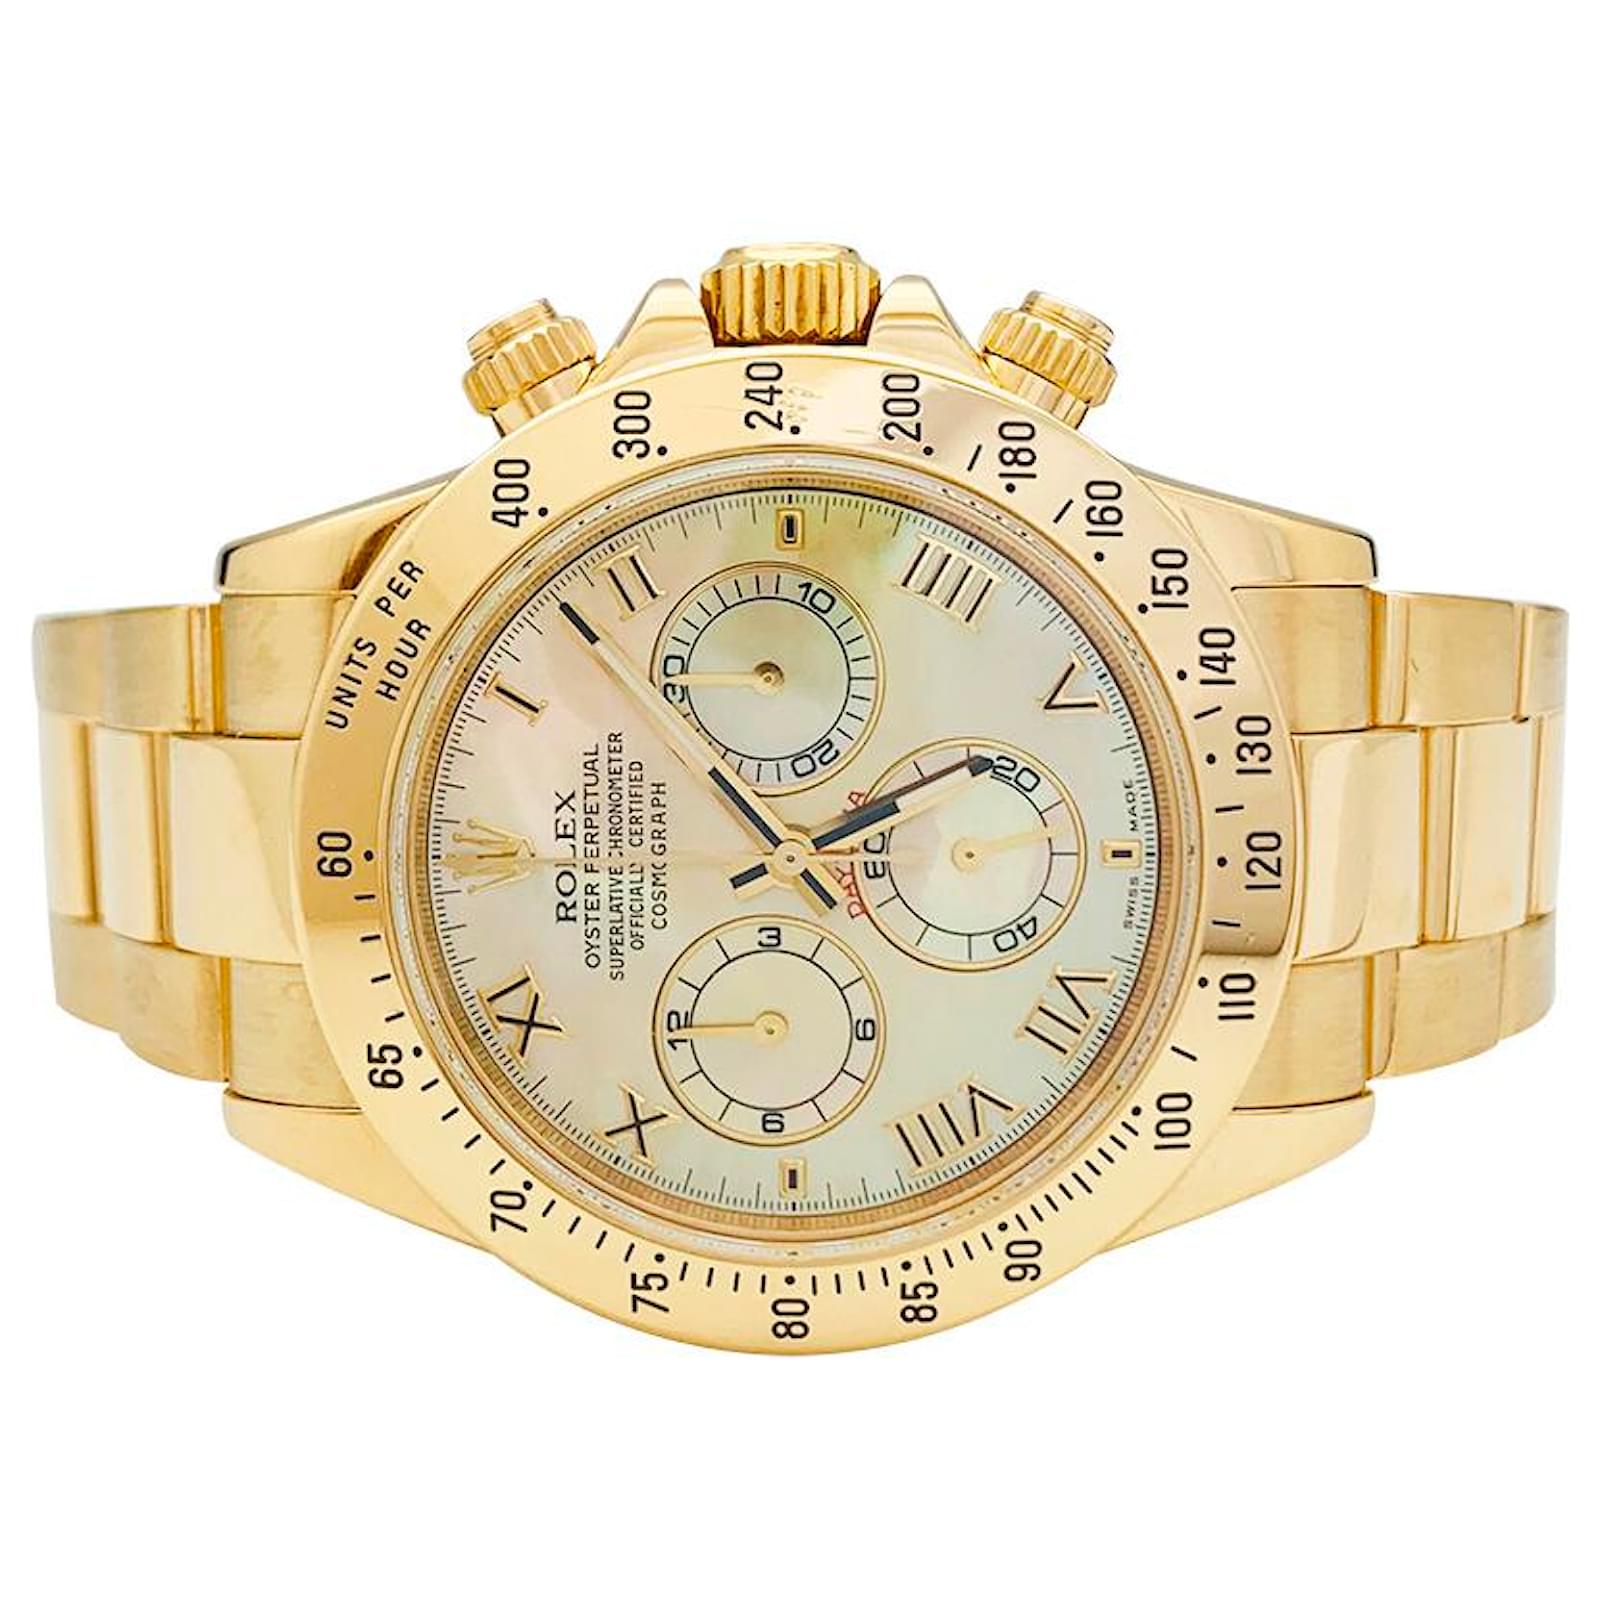 Rolex Watch Model Oyster Perpetual Cosmograph Daytona In Yellow